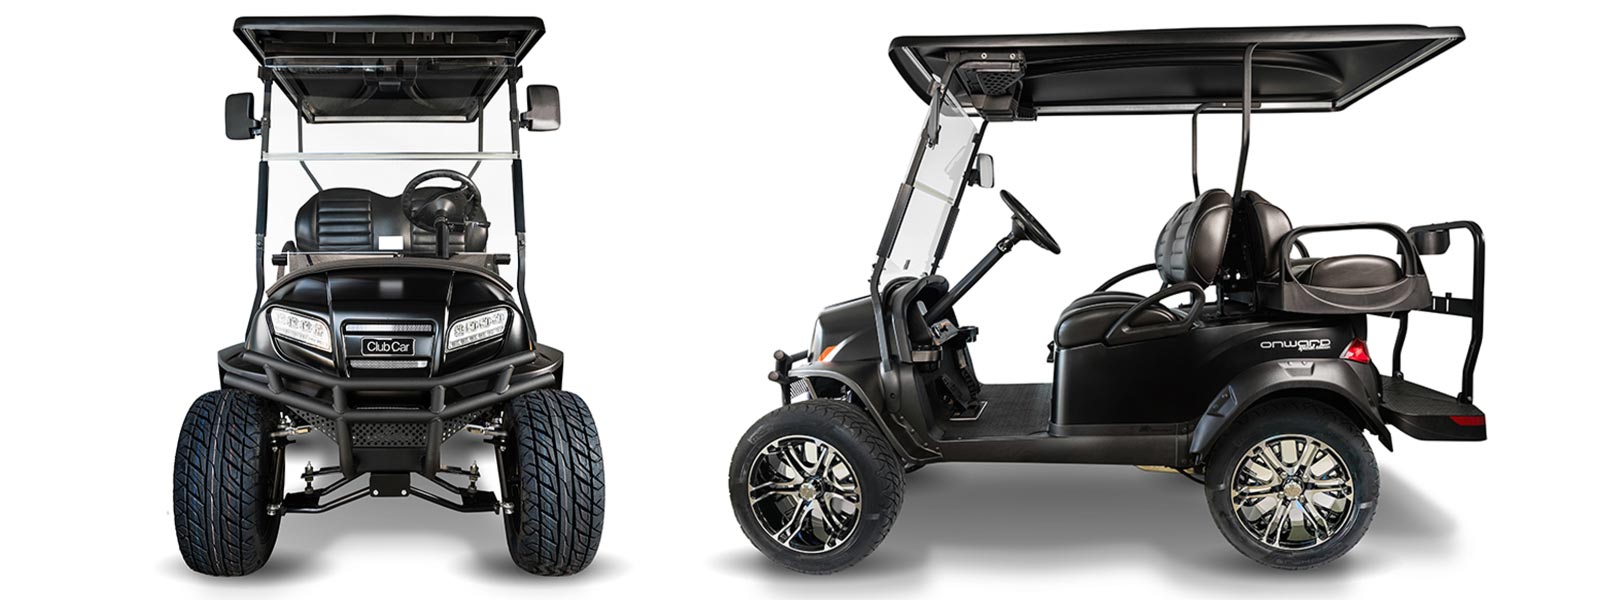 Onward special editions - Matte Black Onward Eclipse lifted 4 passenger golf cart - driver side profile and front view